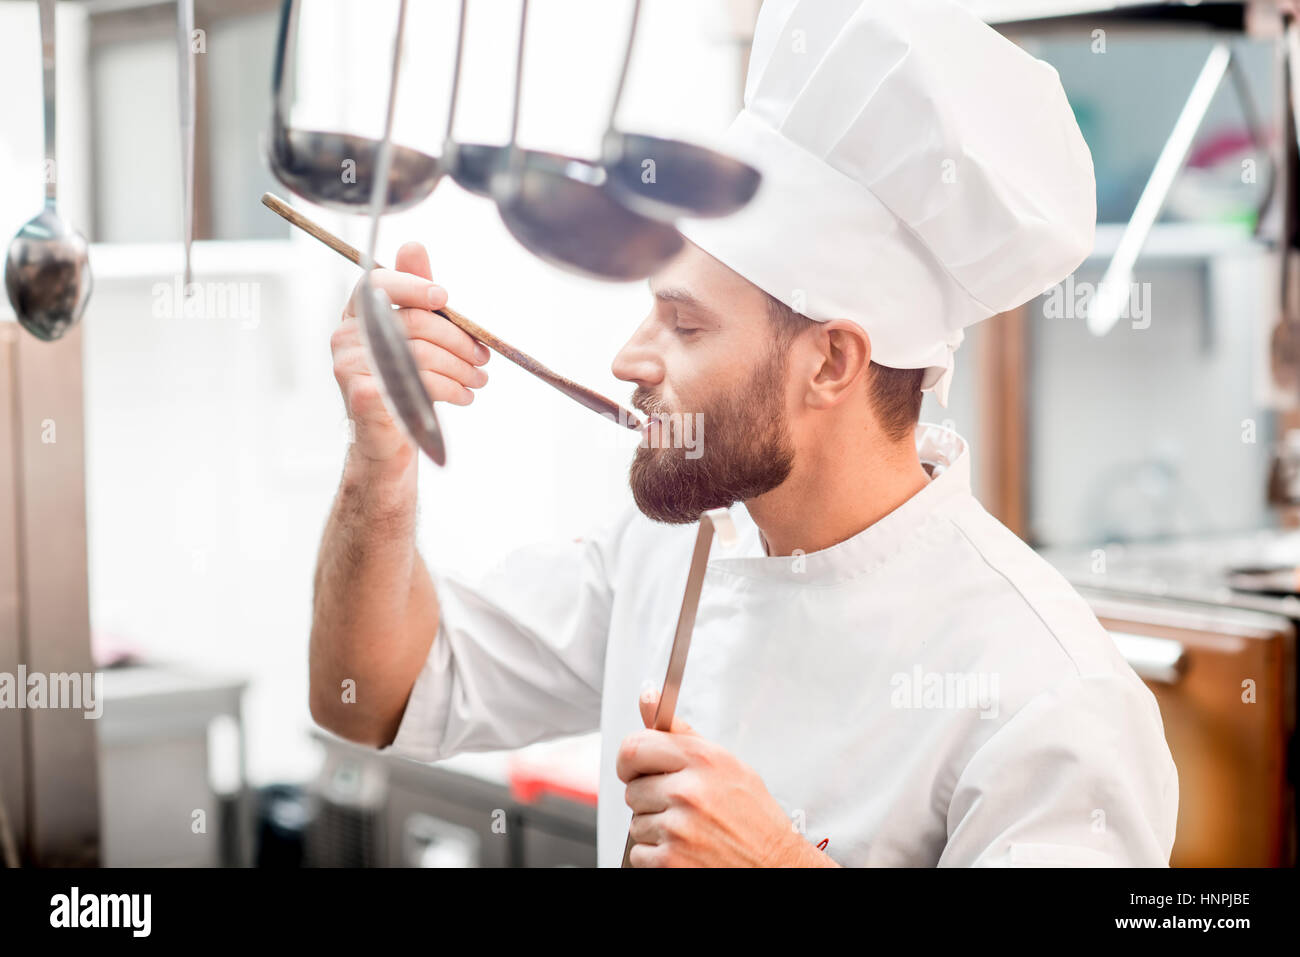 https://c8.alamy.com/comp/HNPJBE/chef-cook-tasting-food-with-wooden-spoon-at-the-restaurant-kitchen-HNPJBE.jpg